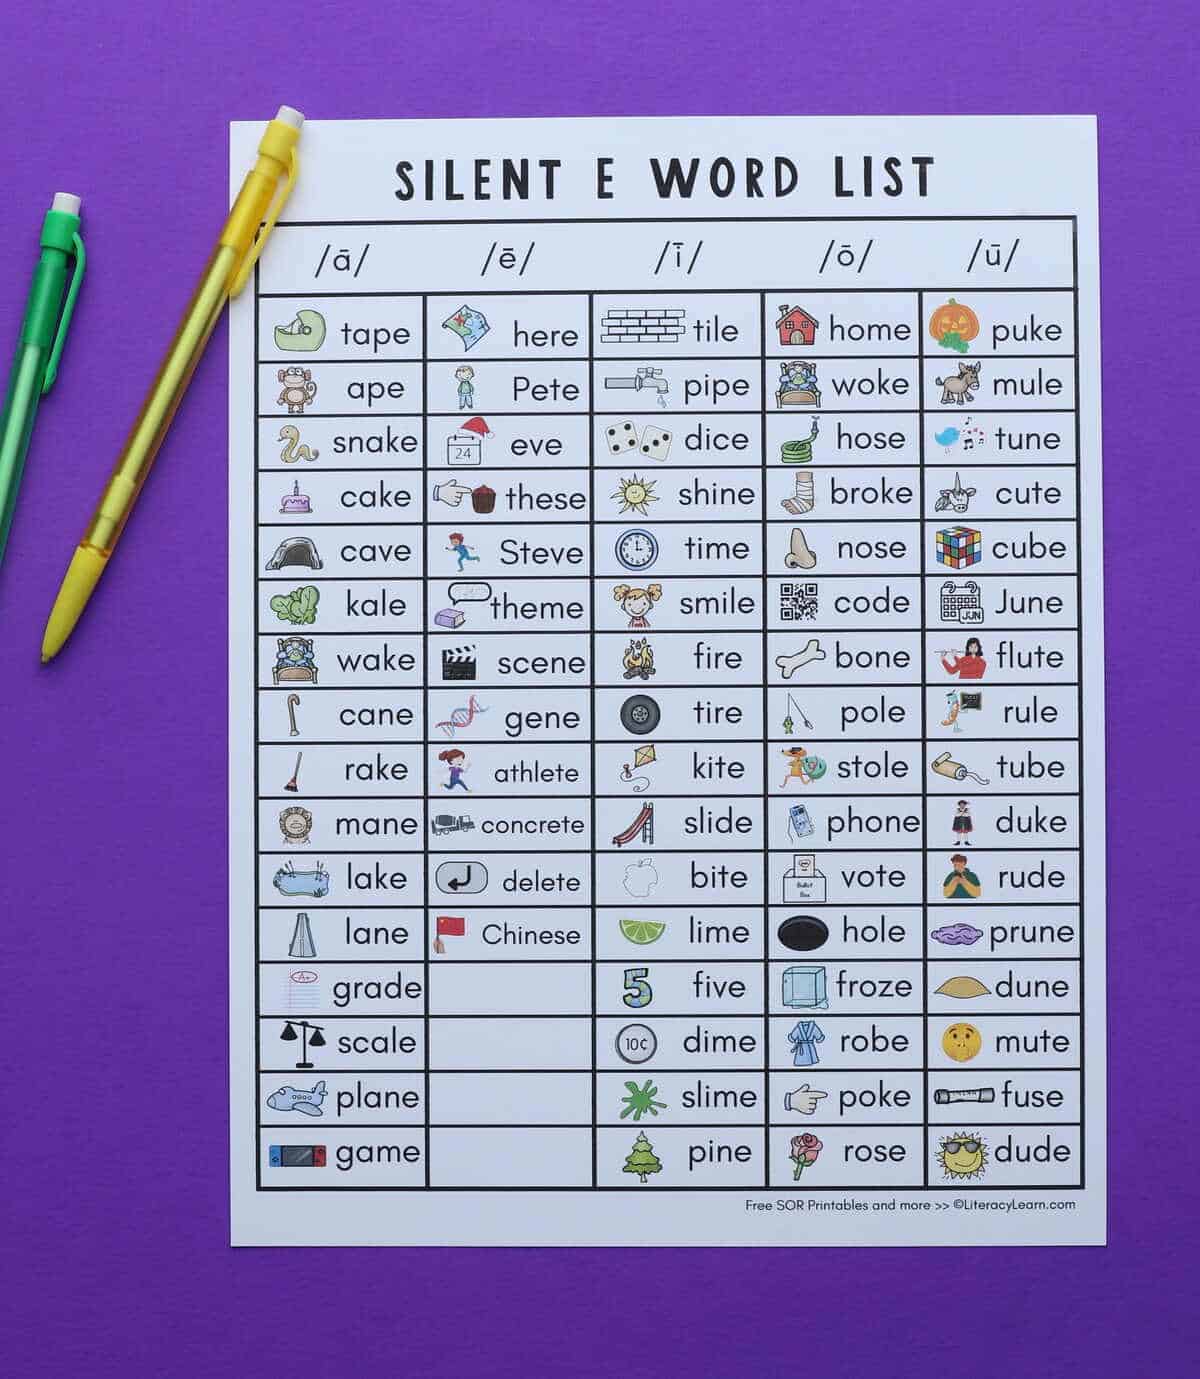 The printed silent e words list on a purple background with two pencils.